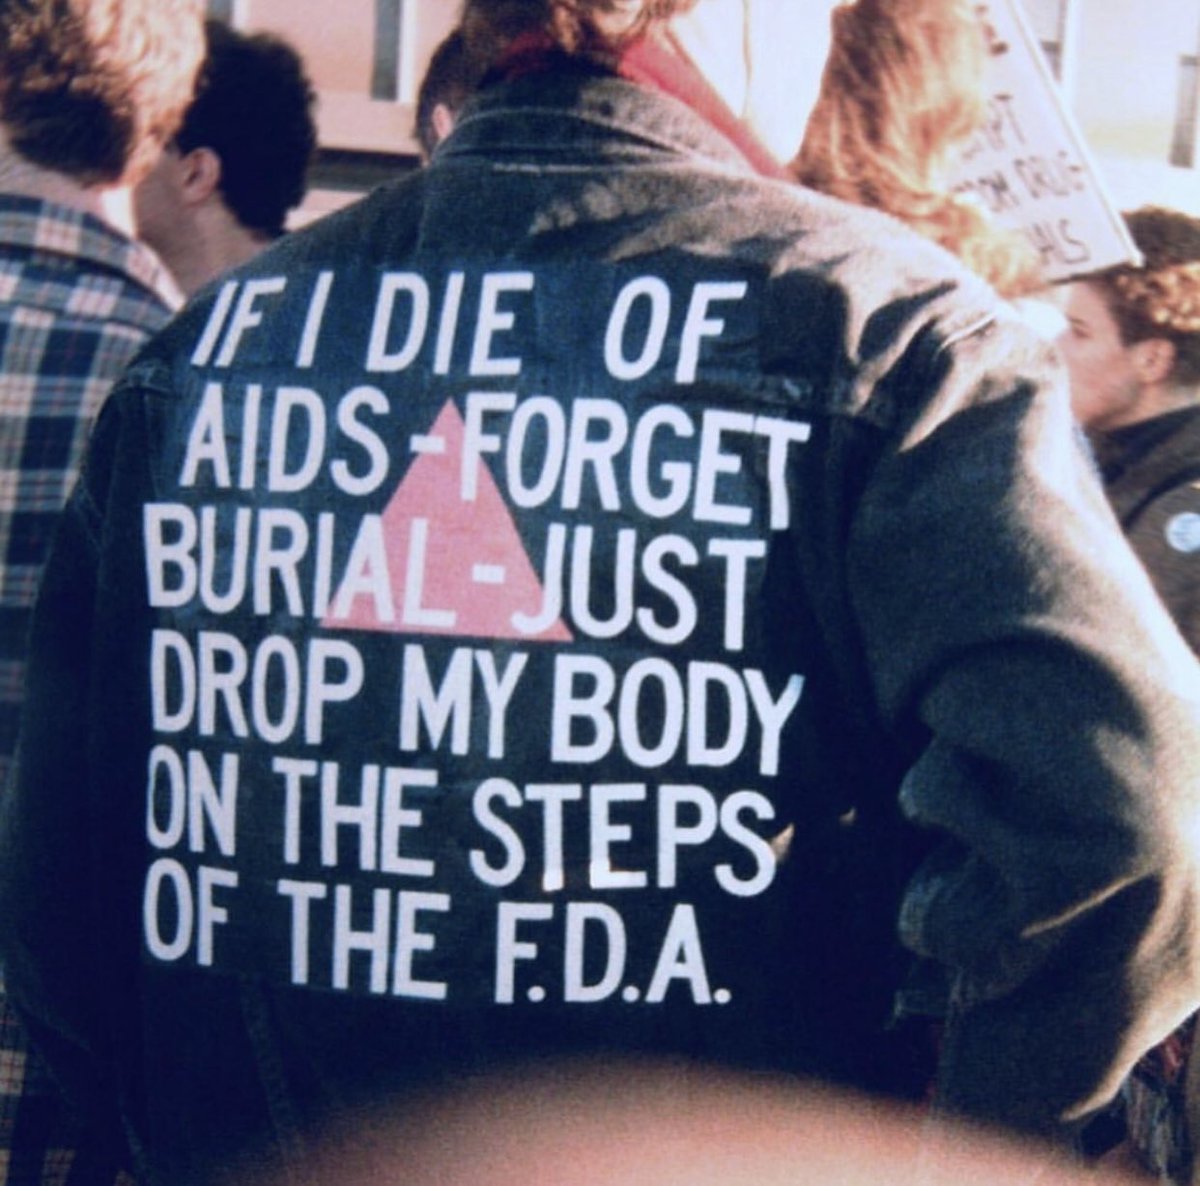 There is an entire generation of queer folk that should be with us today. Get tested. Know your status. Use protection. Take Prep if you’re at risk. We can’t take for granted what these people fought for. #WorldsAidsDay